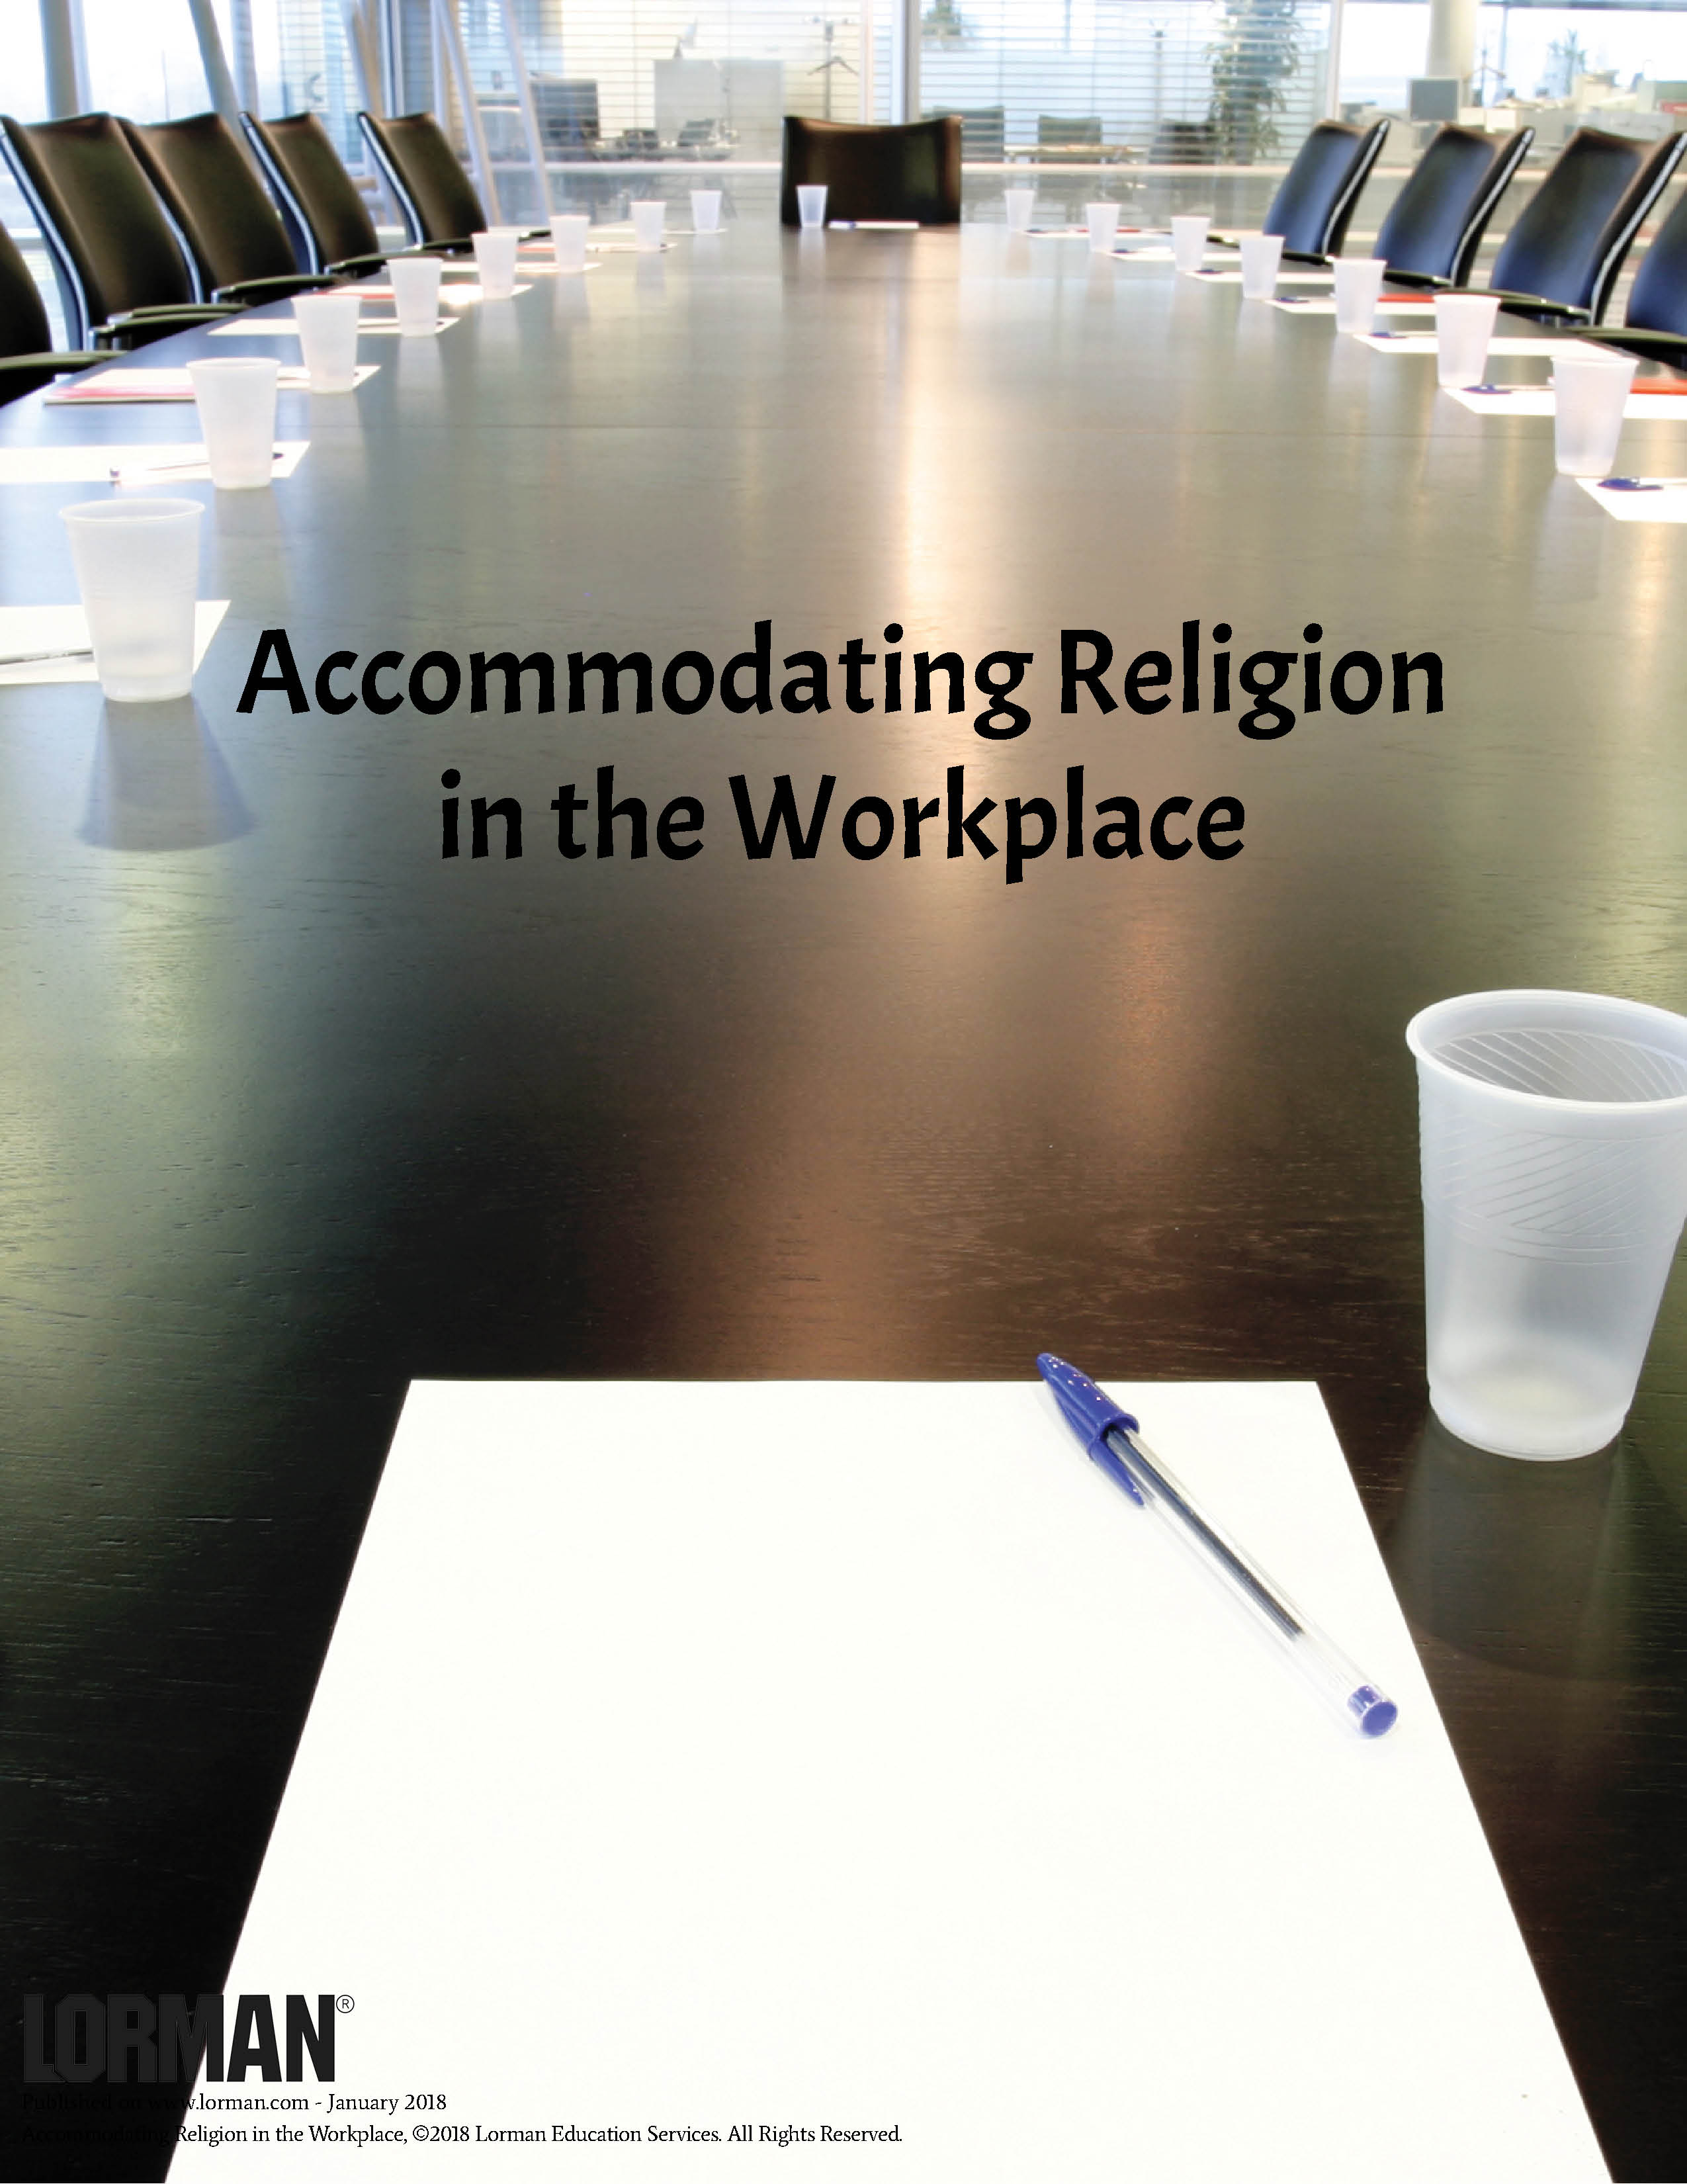 Accommodating Religion in the Workplace